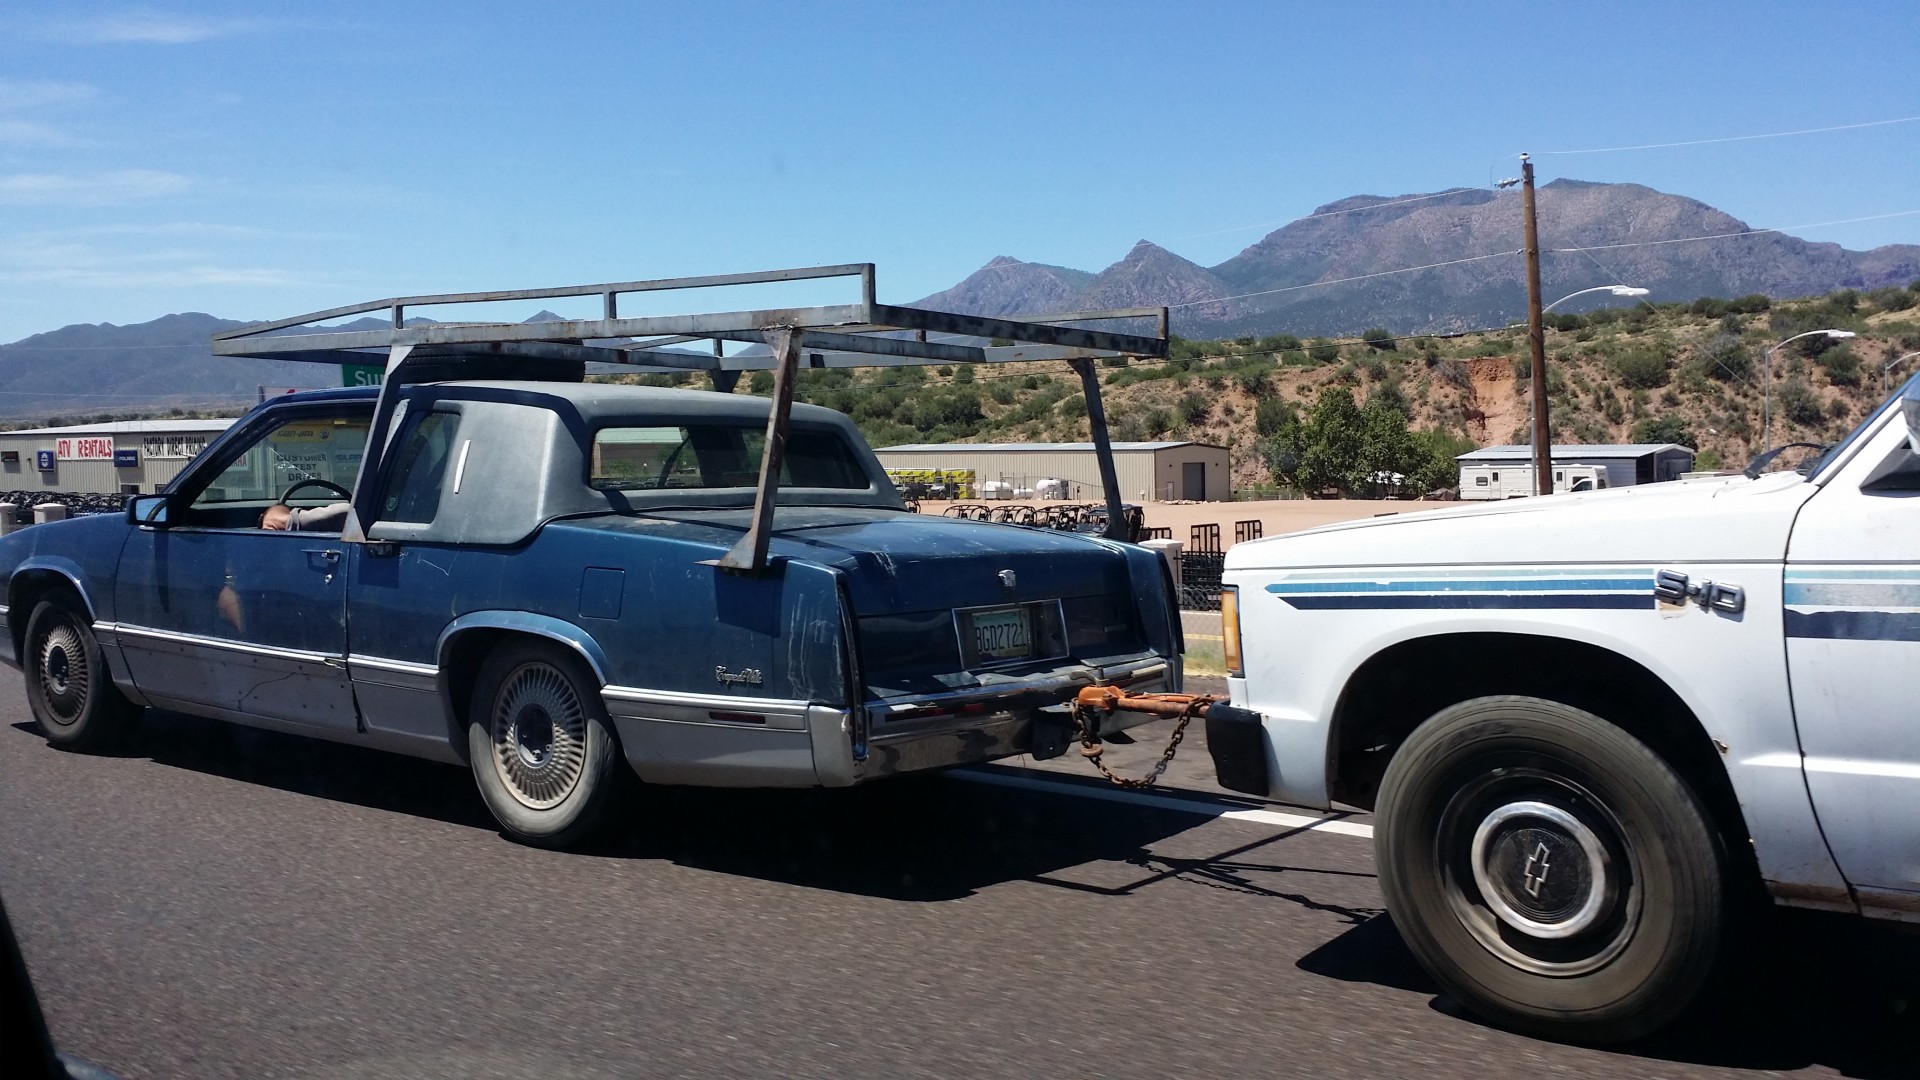 Custom Cadillac seen towing a truck on the highway in Arizona